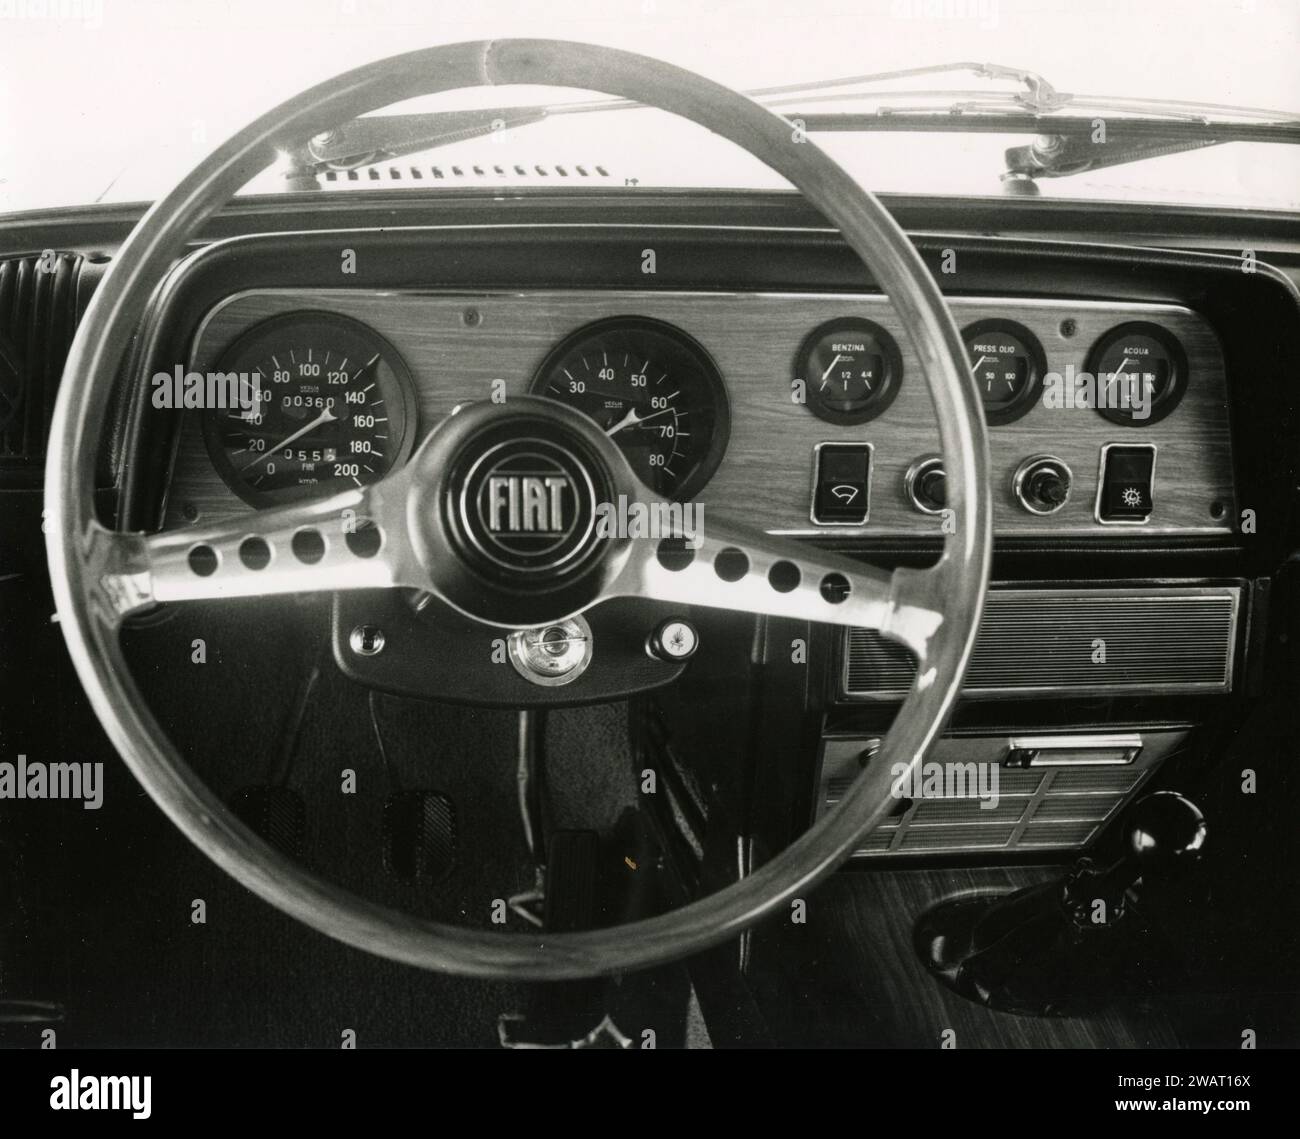 View of the dashboard of the FIAT 124 Sport Coupé car, Italy 1970s Stock Photo